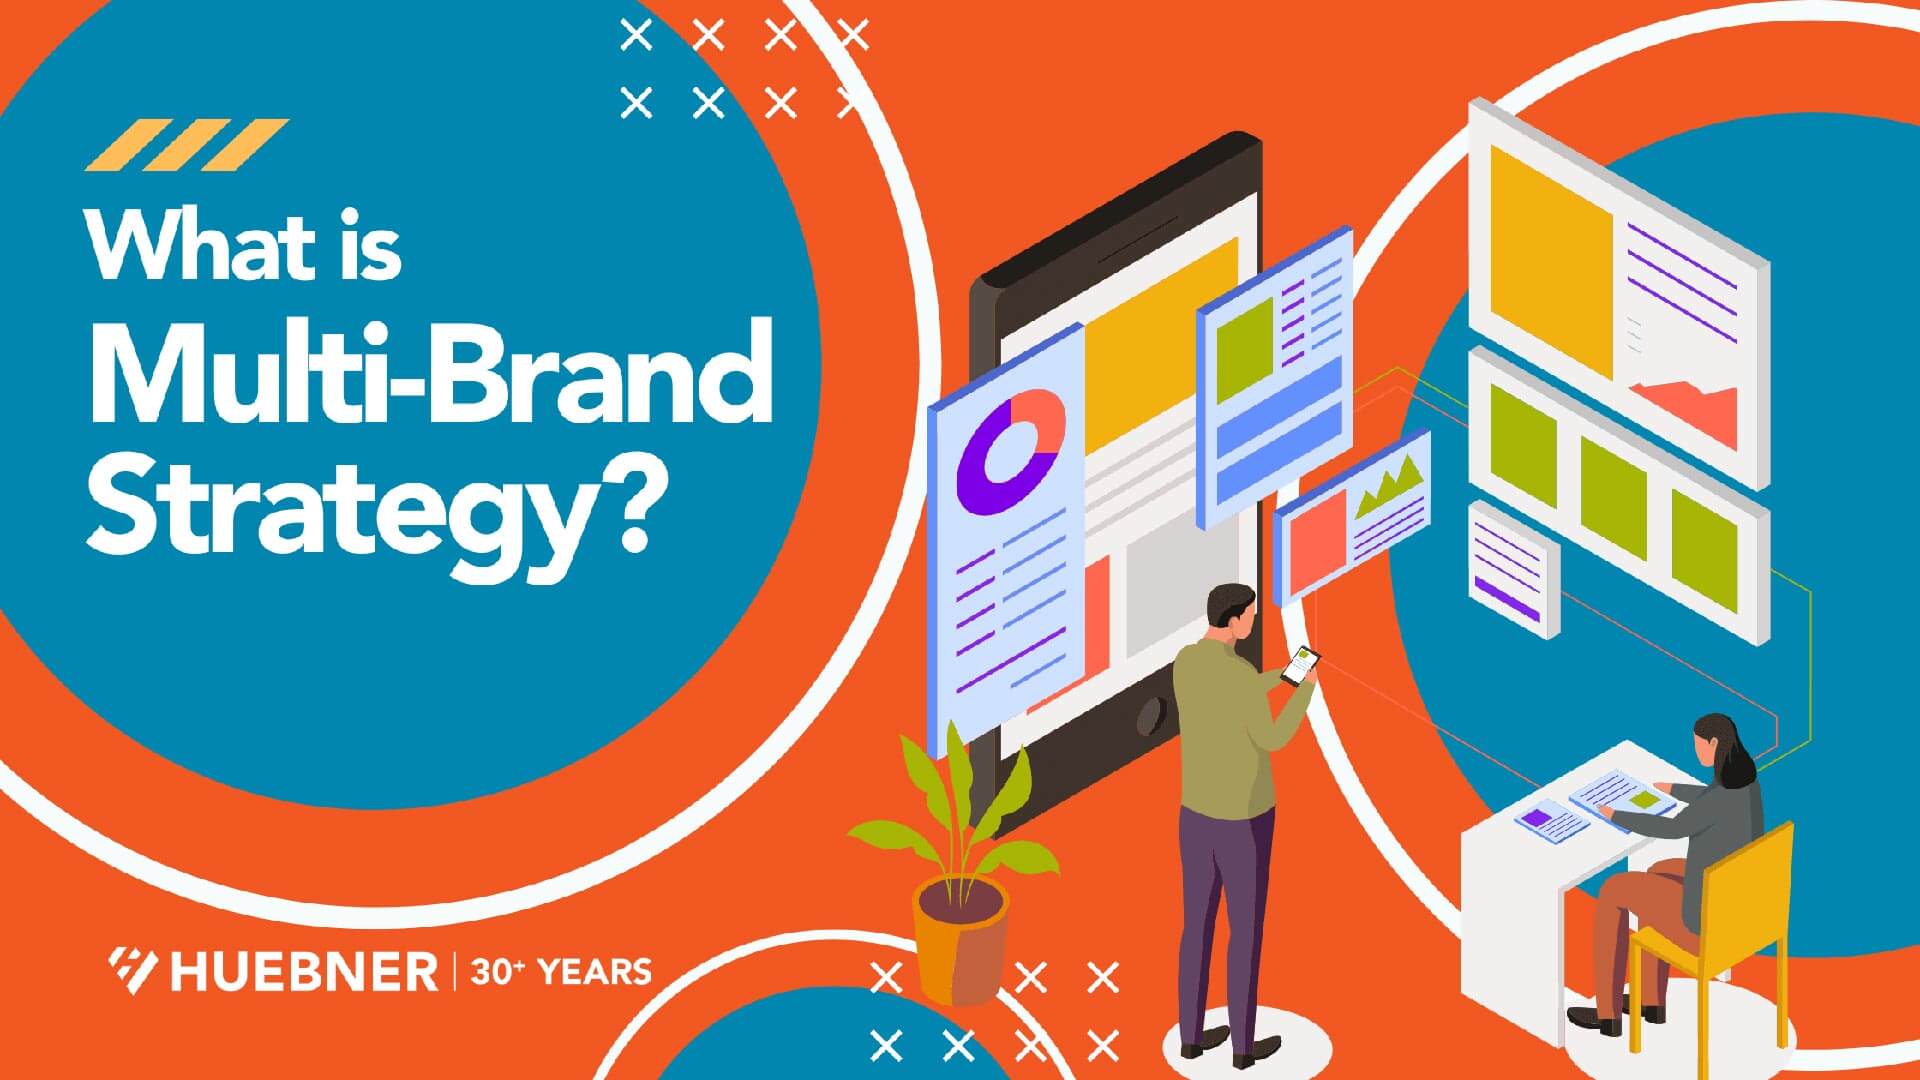 What is Multi-Brand Strategy?